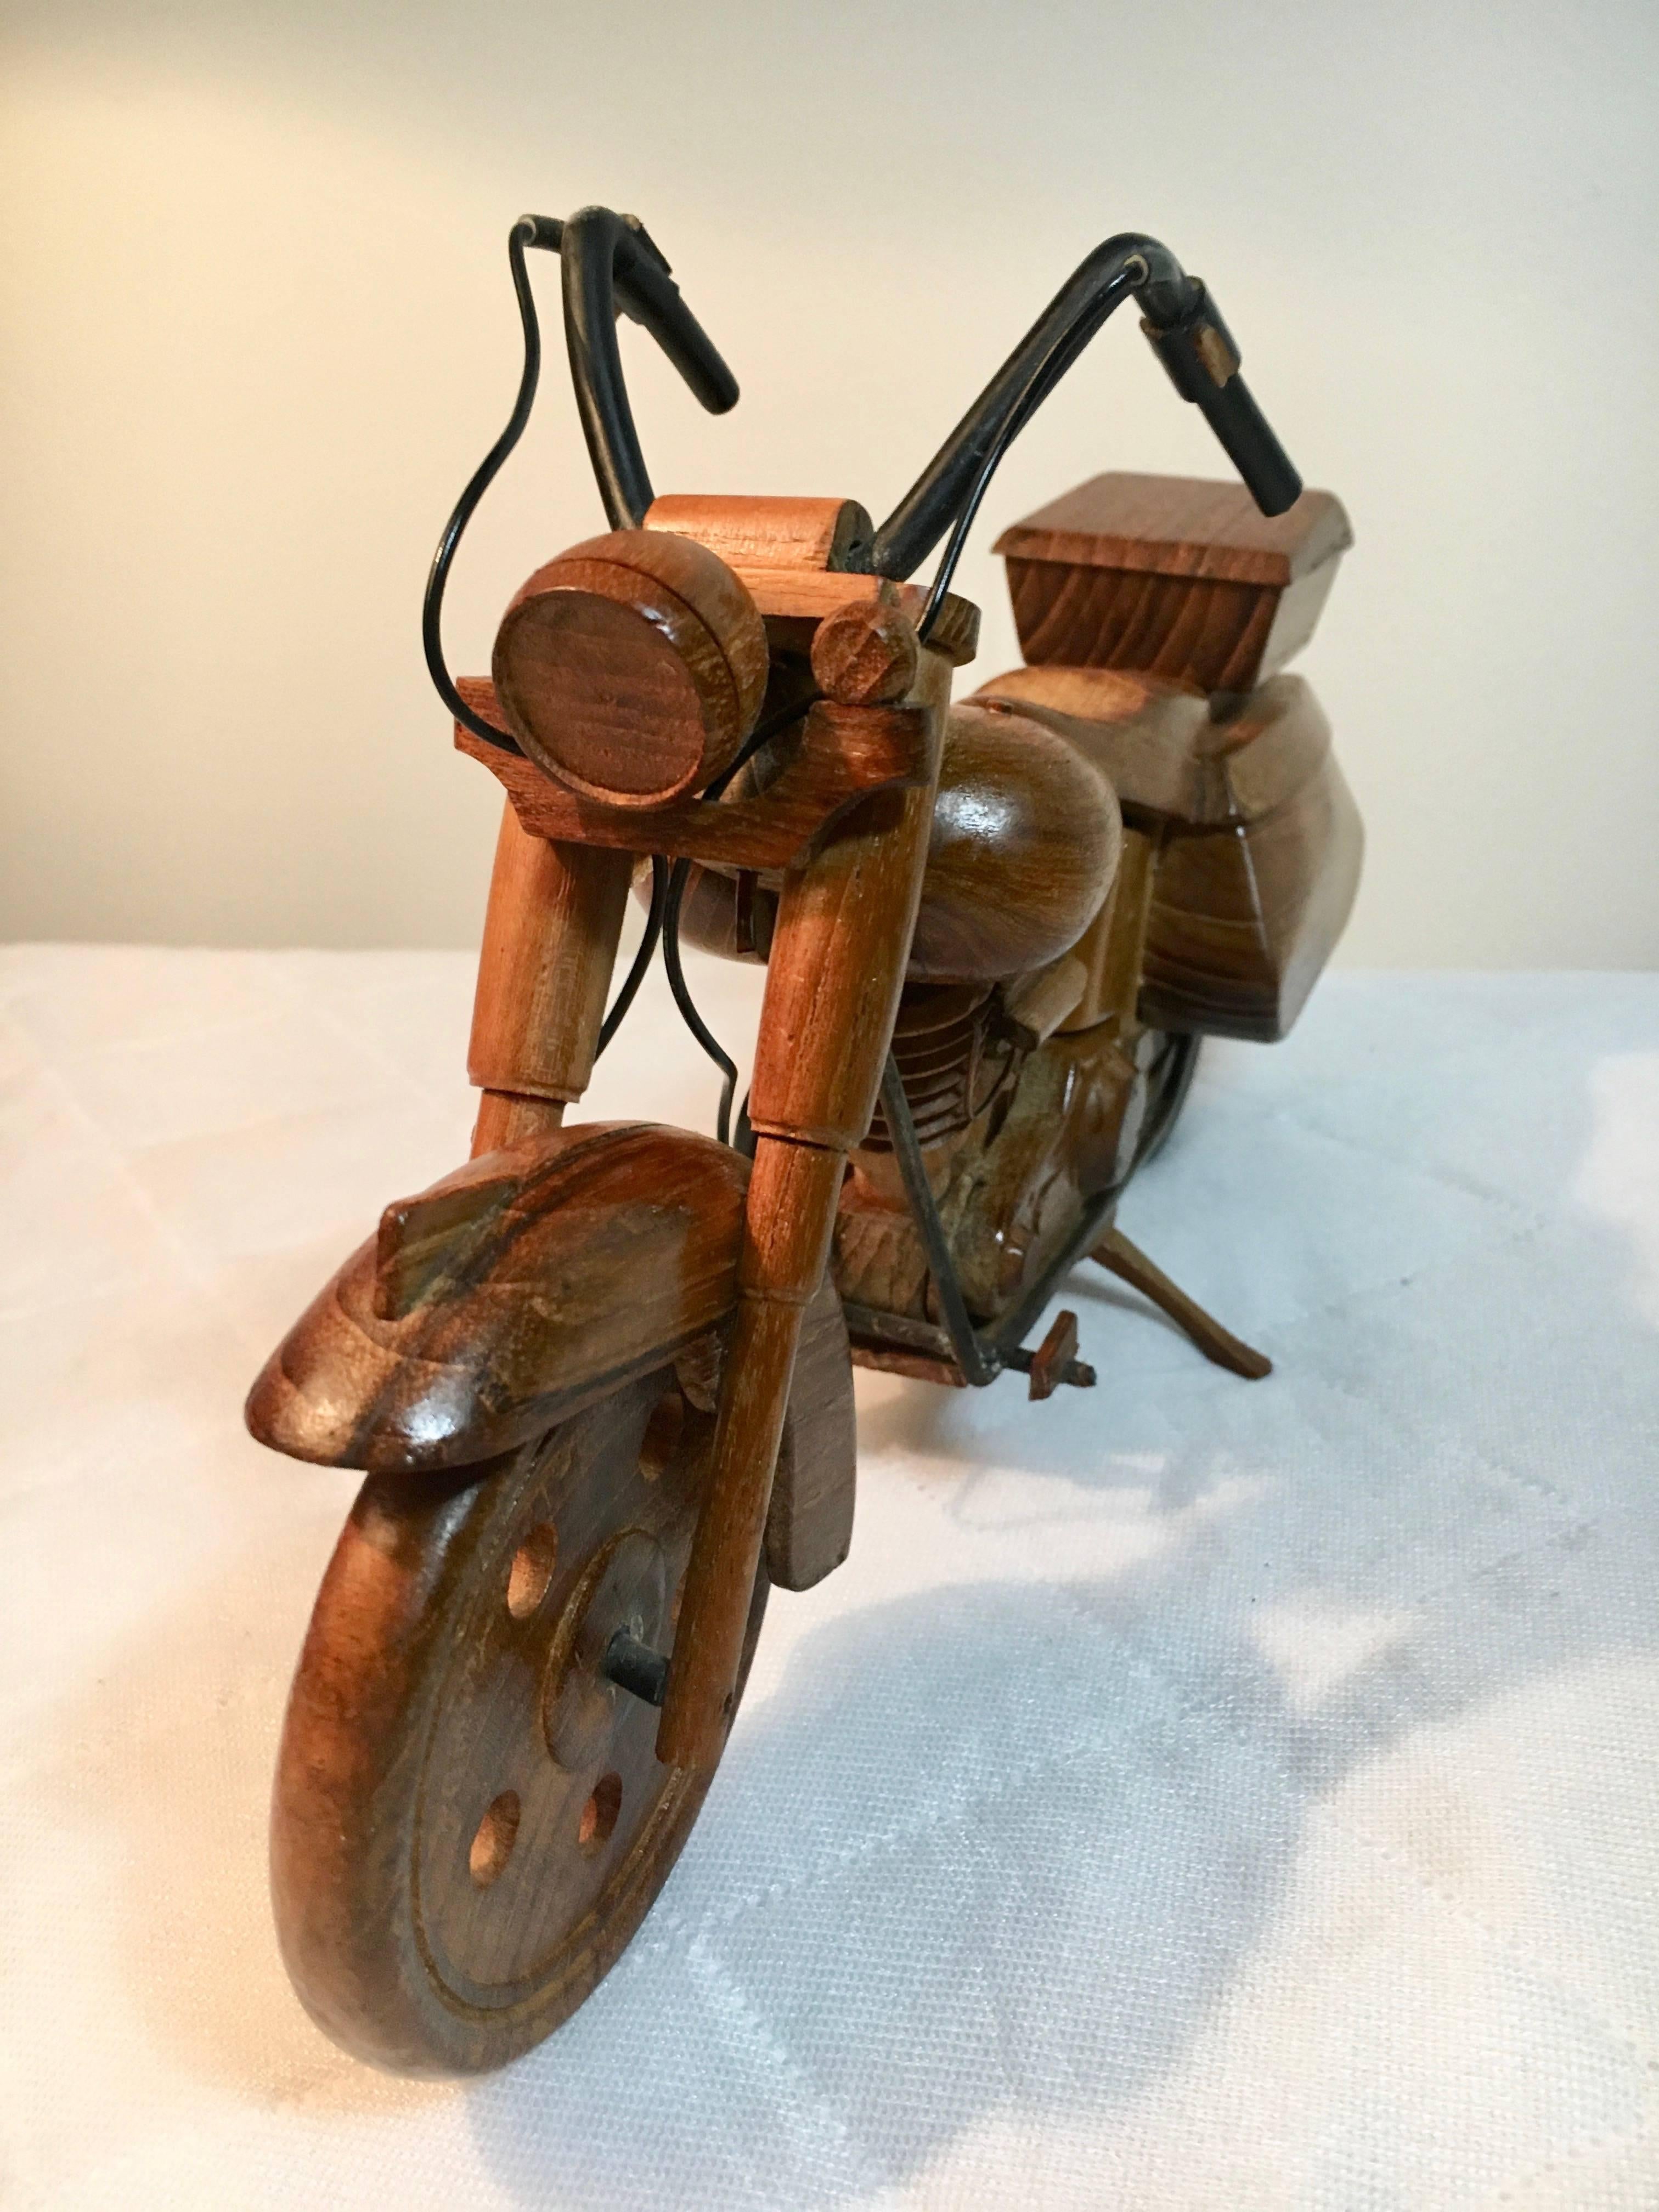 Very detailed wooden sculpture / replica of a motorcycle - Wheels turn and kick Stand functions allowing the bike to Stand in place.
This piece is ideal for the motorcycle enthusiast, office or den - Childs room. a very thoroughly thought out model.